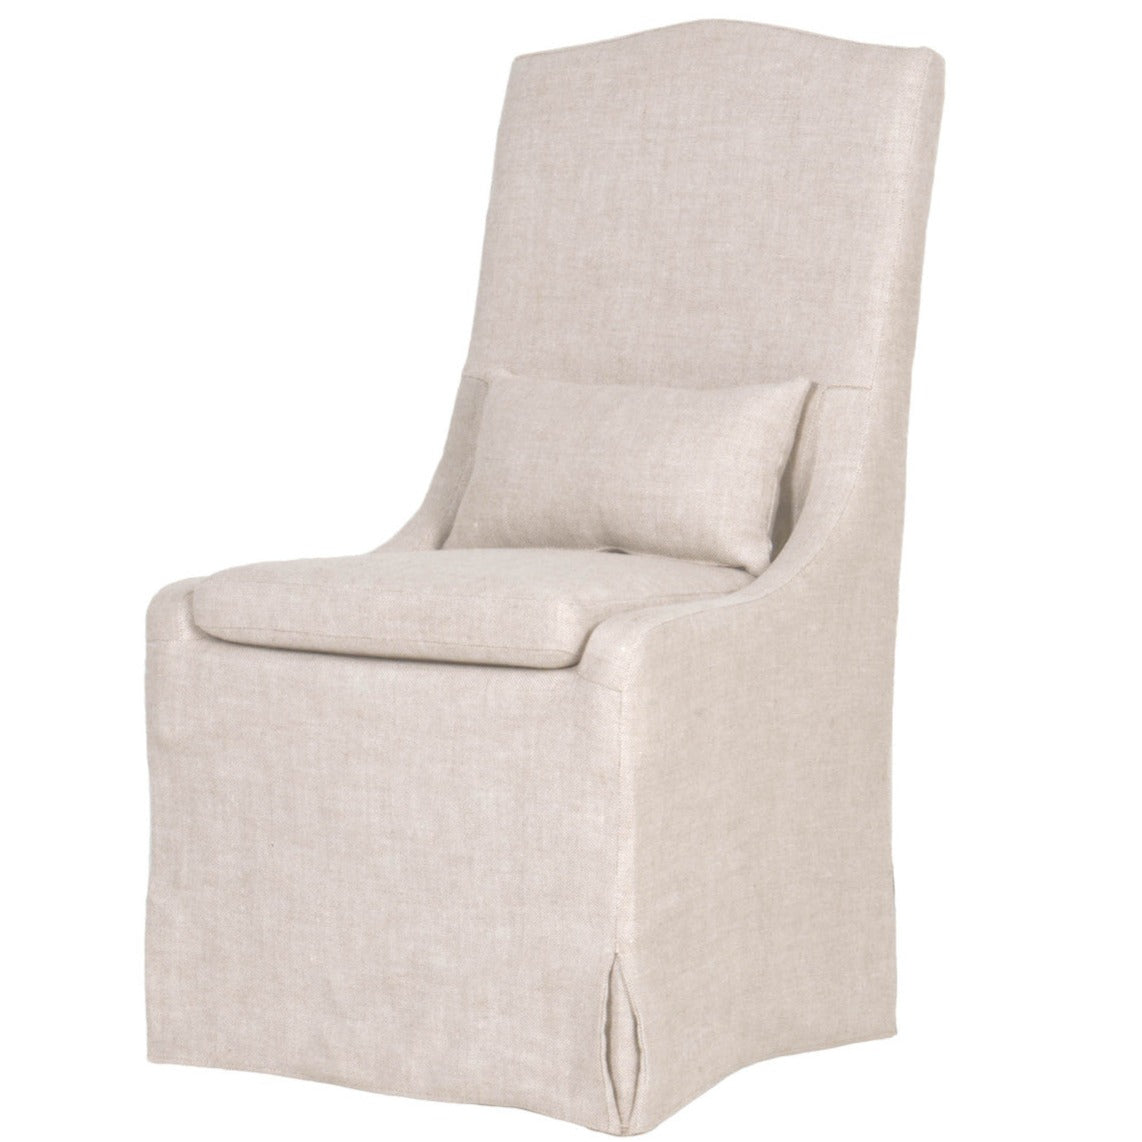 Colette Slipcover Bisque French Linen Dining Chair